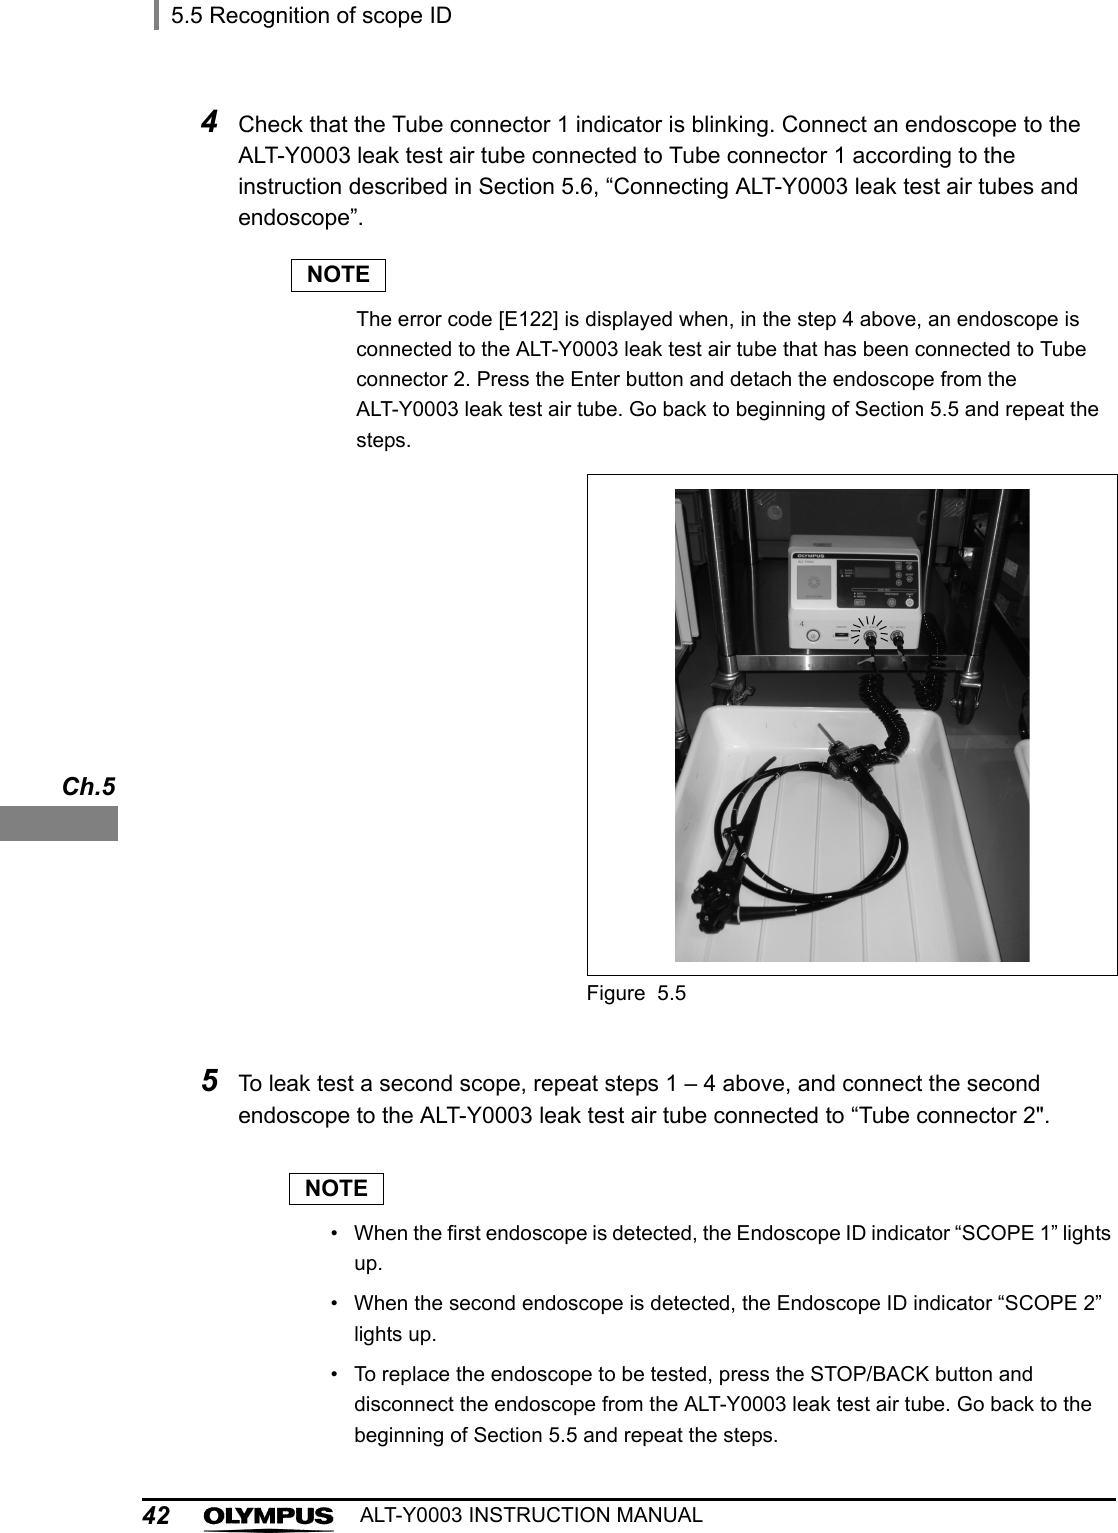 425.5 Recognition of scope IDALT-Y0003 INSTRUCTION MANUALCh.5NOTE• When the first endoscope is detected, the Endoscope ID indicator “SCOPE 1” lights up.• When the second endoscope is detected, the Endoscope ID indicator “SCOPE 2” lights up.• To replace the endoscope to be tested, press the STOP/BACK button and disconnect the endoscope from the ALT-Y0003 leak test air tube. Go back to the beginning of Section 5.5 and repeat the steps.4Check that the Tube connector 1 indicator is blinking. Connect an endoscope to the ALT-Y0003 leak test air tube connected to Tube connector 1 according to the instruction described in Section 5.6, “Connecting ALT-Y0003 leak test air tubes and endoscope”.NOTEThe error code [E122] is displayed when, in the step 4 above, an endoscope is connected to the ALT-Y0003 leak test air tube that has been connected to Tube connector 2. Press the Enter button and detach the endoscope from the ALT-Y0003 leak test air tube. Go back to beginning of Section 5.5 and repeat the steps.Figure 5.55To leak test a second scope, repeat steps 1 – 4 above, and connect the second endoscope to the ALT-Y0003 leak test air tube connected to “Tube connector 2&quot;.